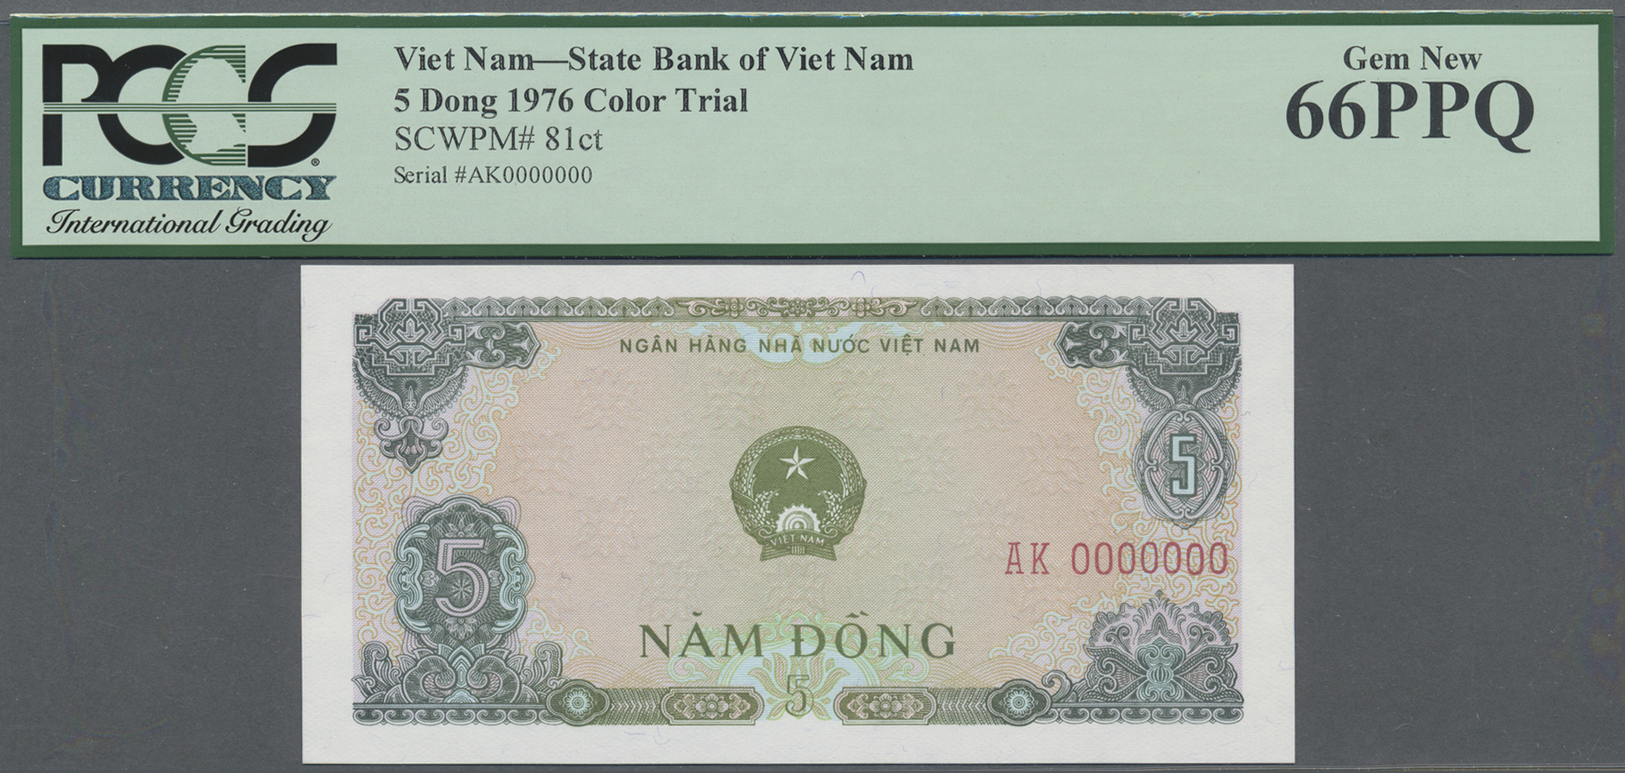 03570 Vietnam: set of 10 Color Trial notes with zero serial numbers, all PCGS graded, containing 3x 10 Dong 1976 P. 82ct